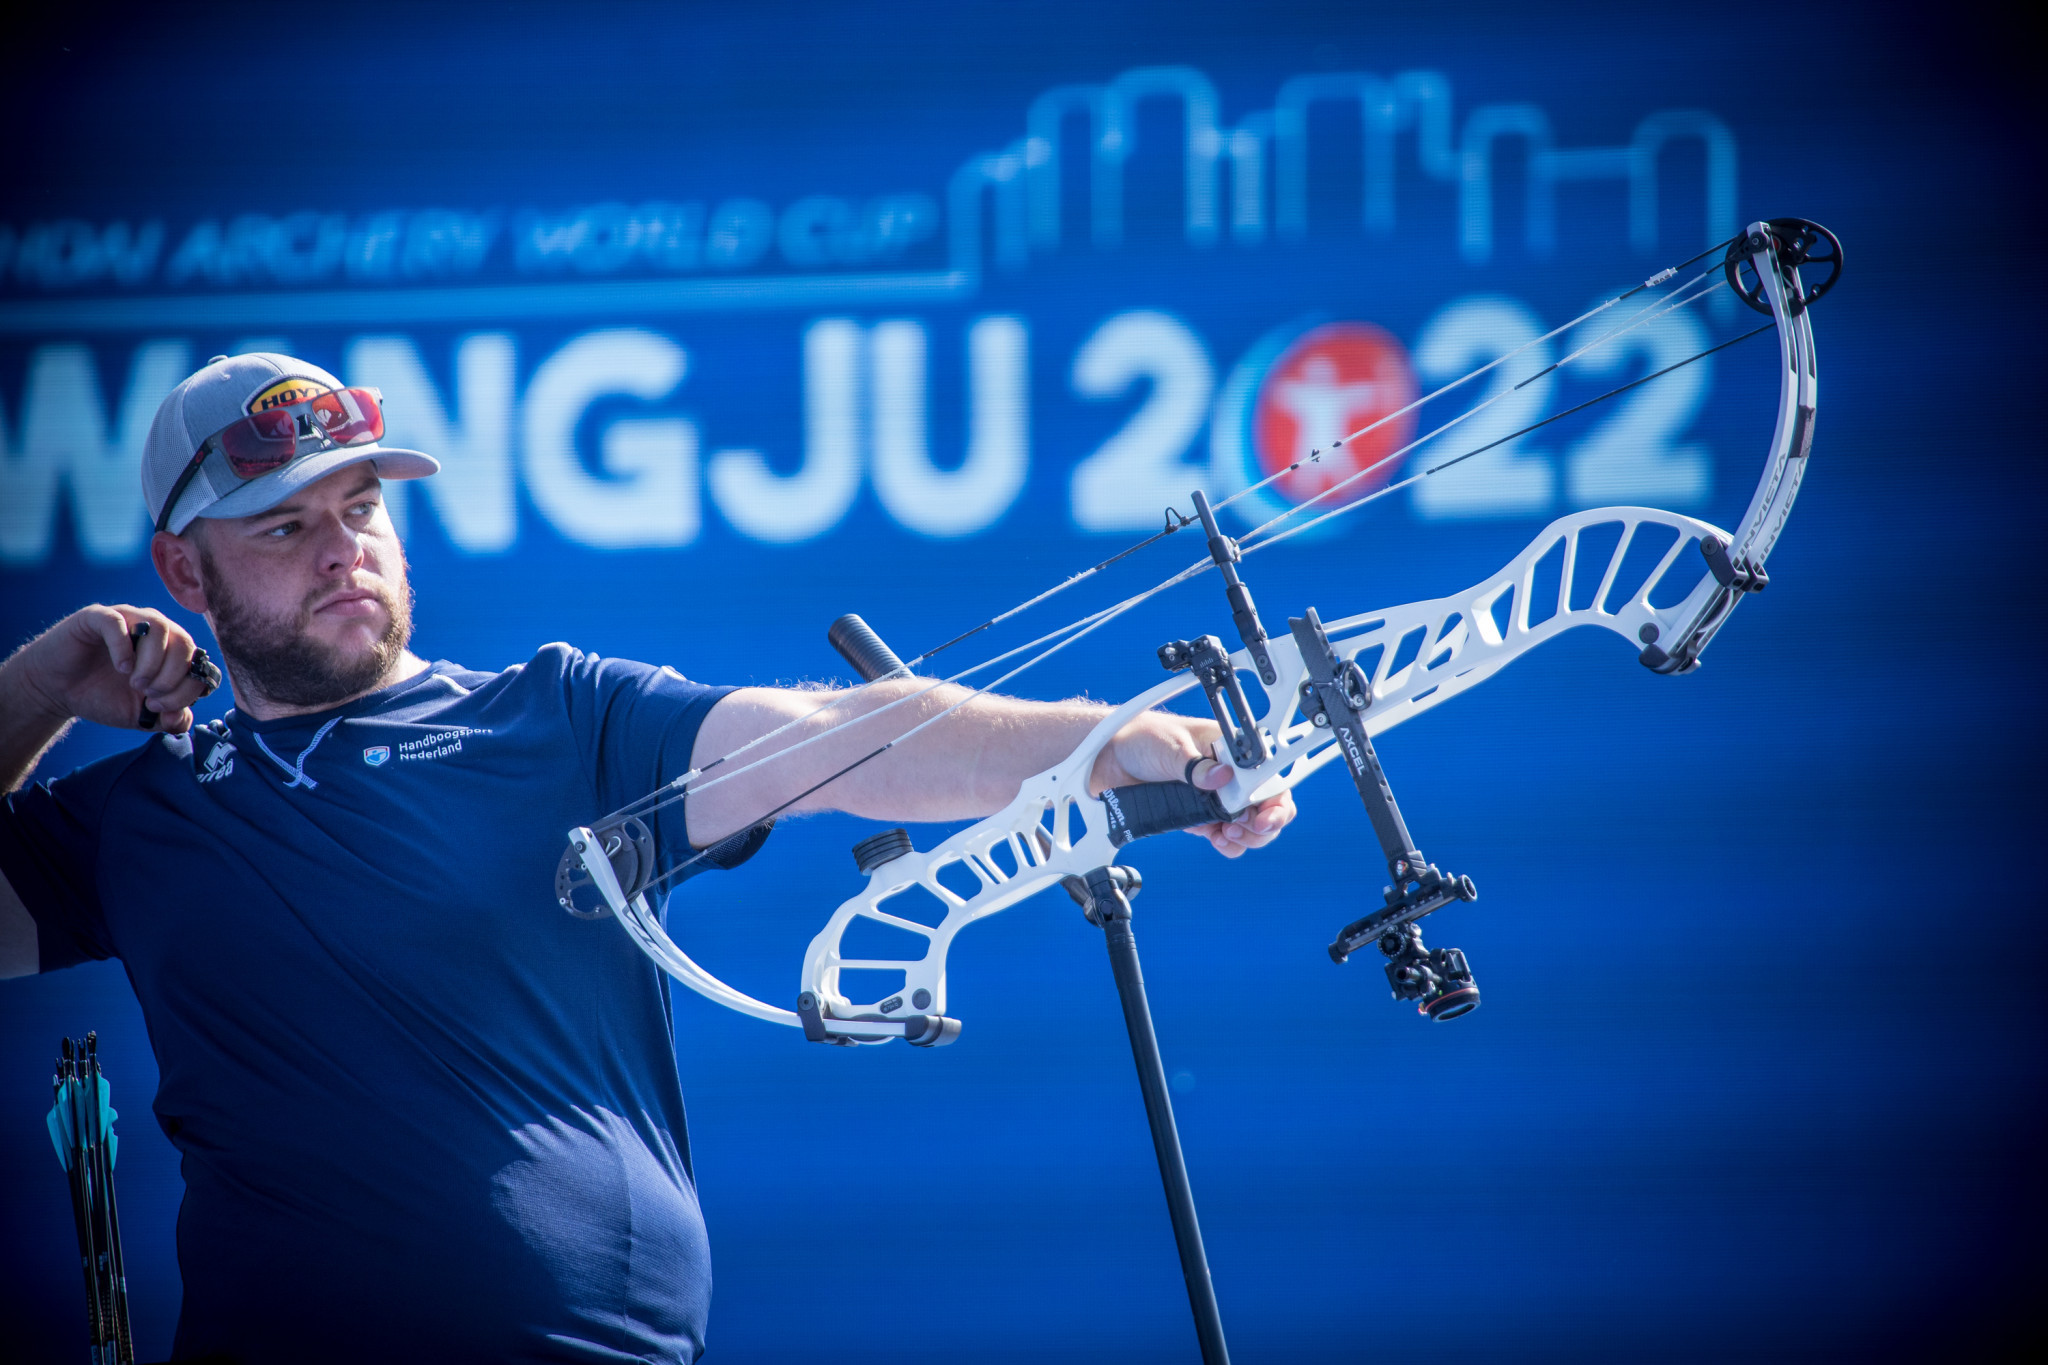 Schloesser earns consecutive compound wins at Archery World Cup in Gwangju